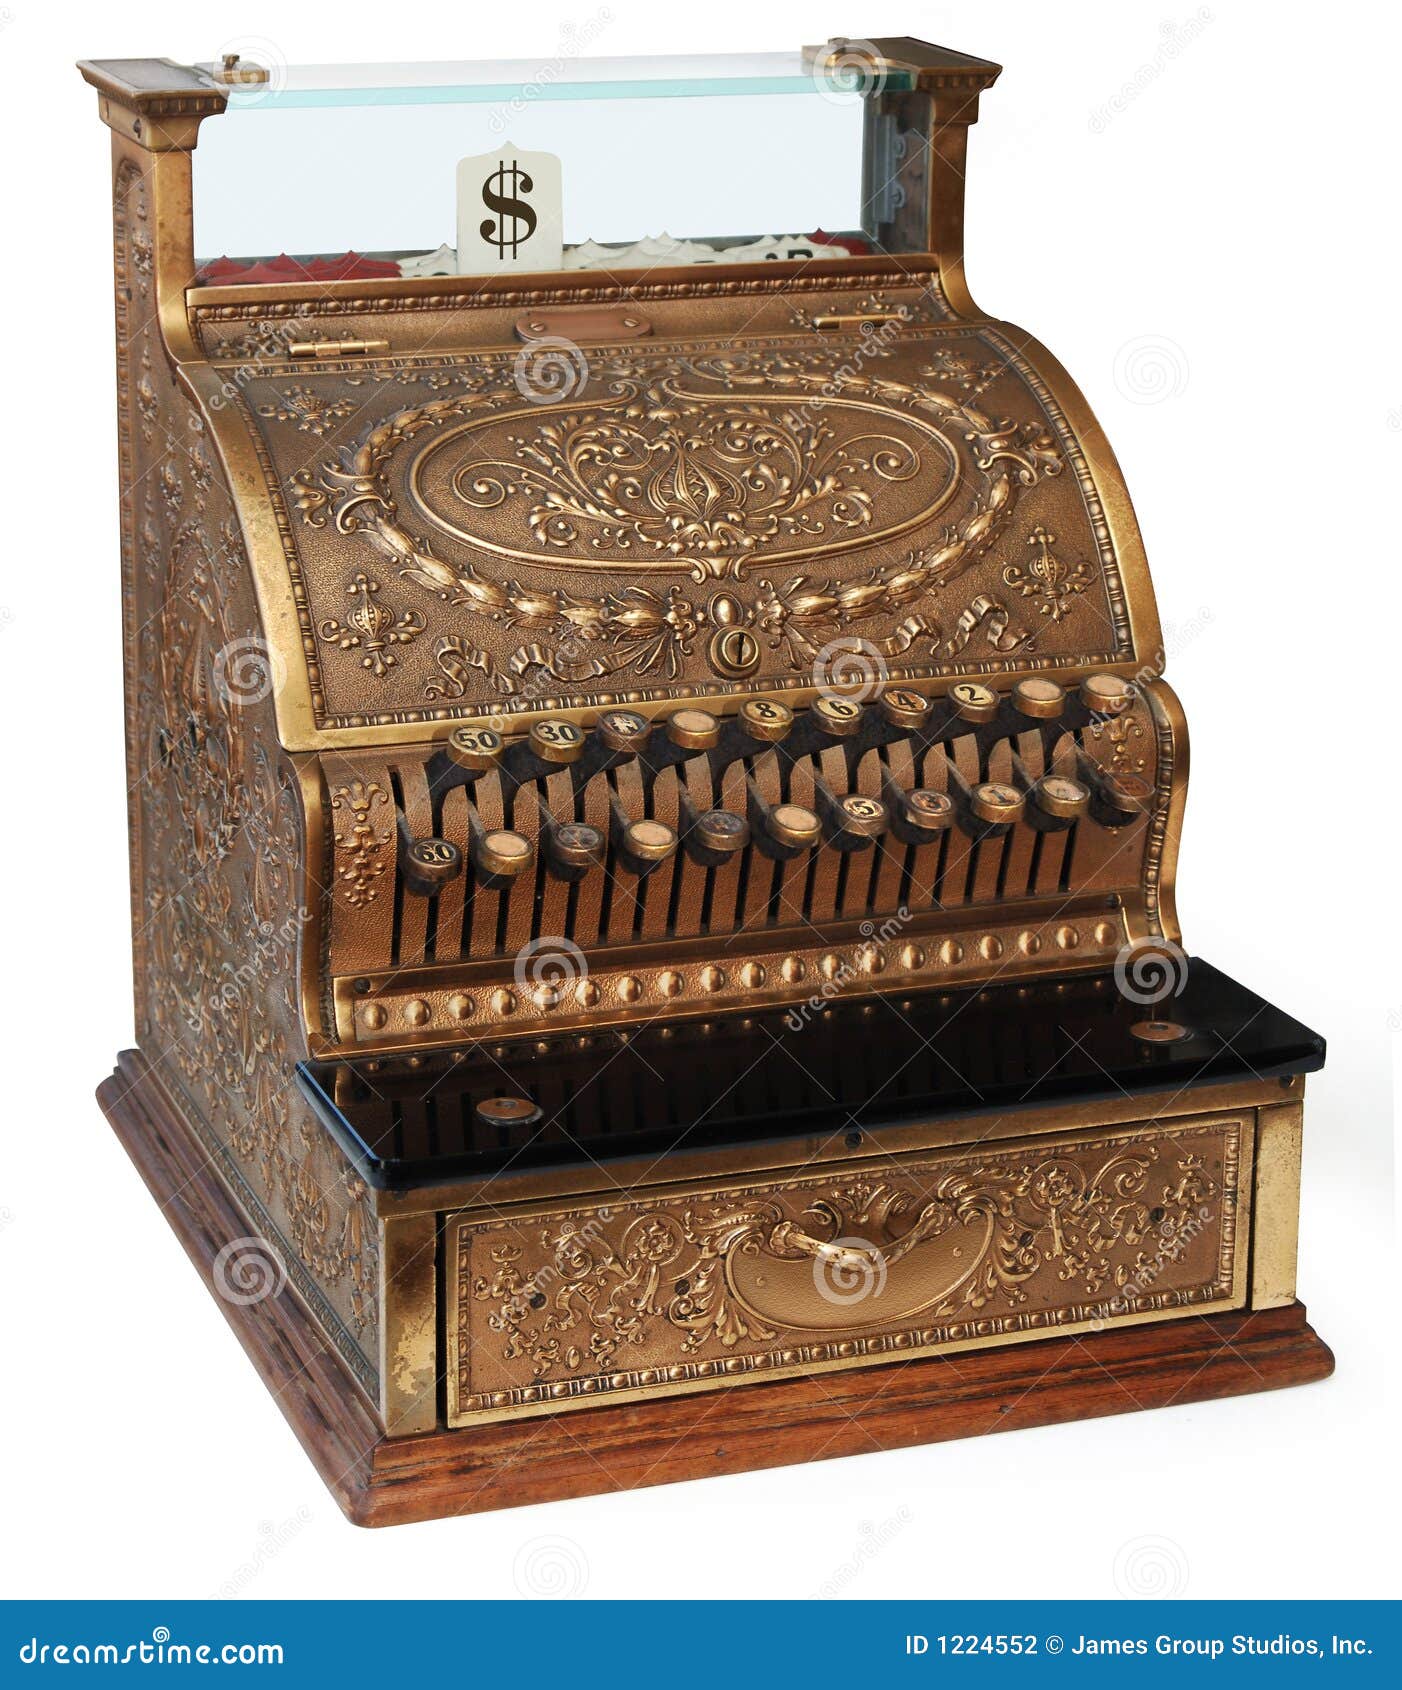 old-fashioned-cash-register-isomorphic-view-1224552.jpg